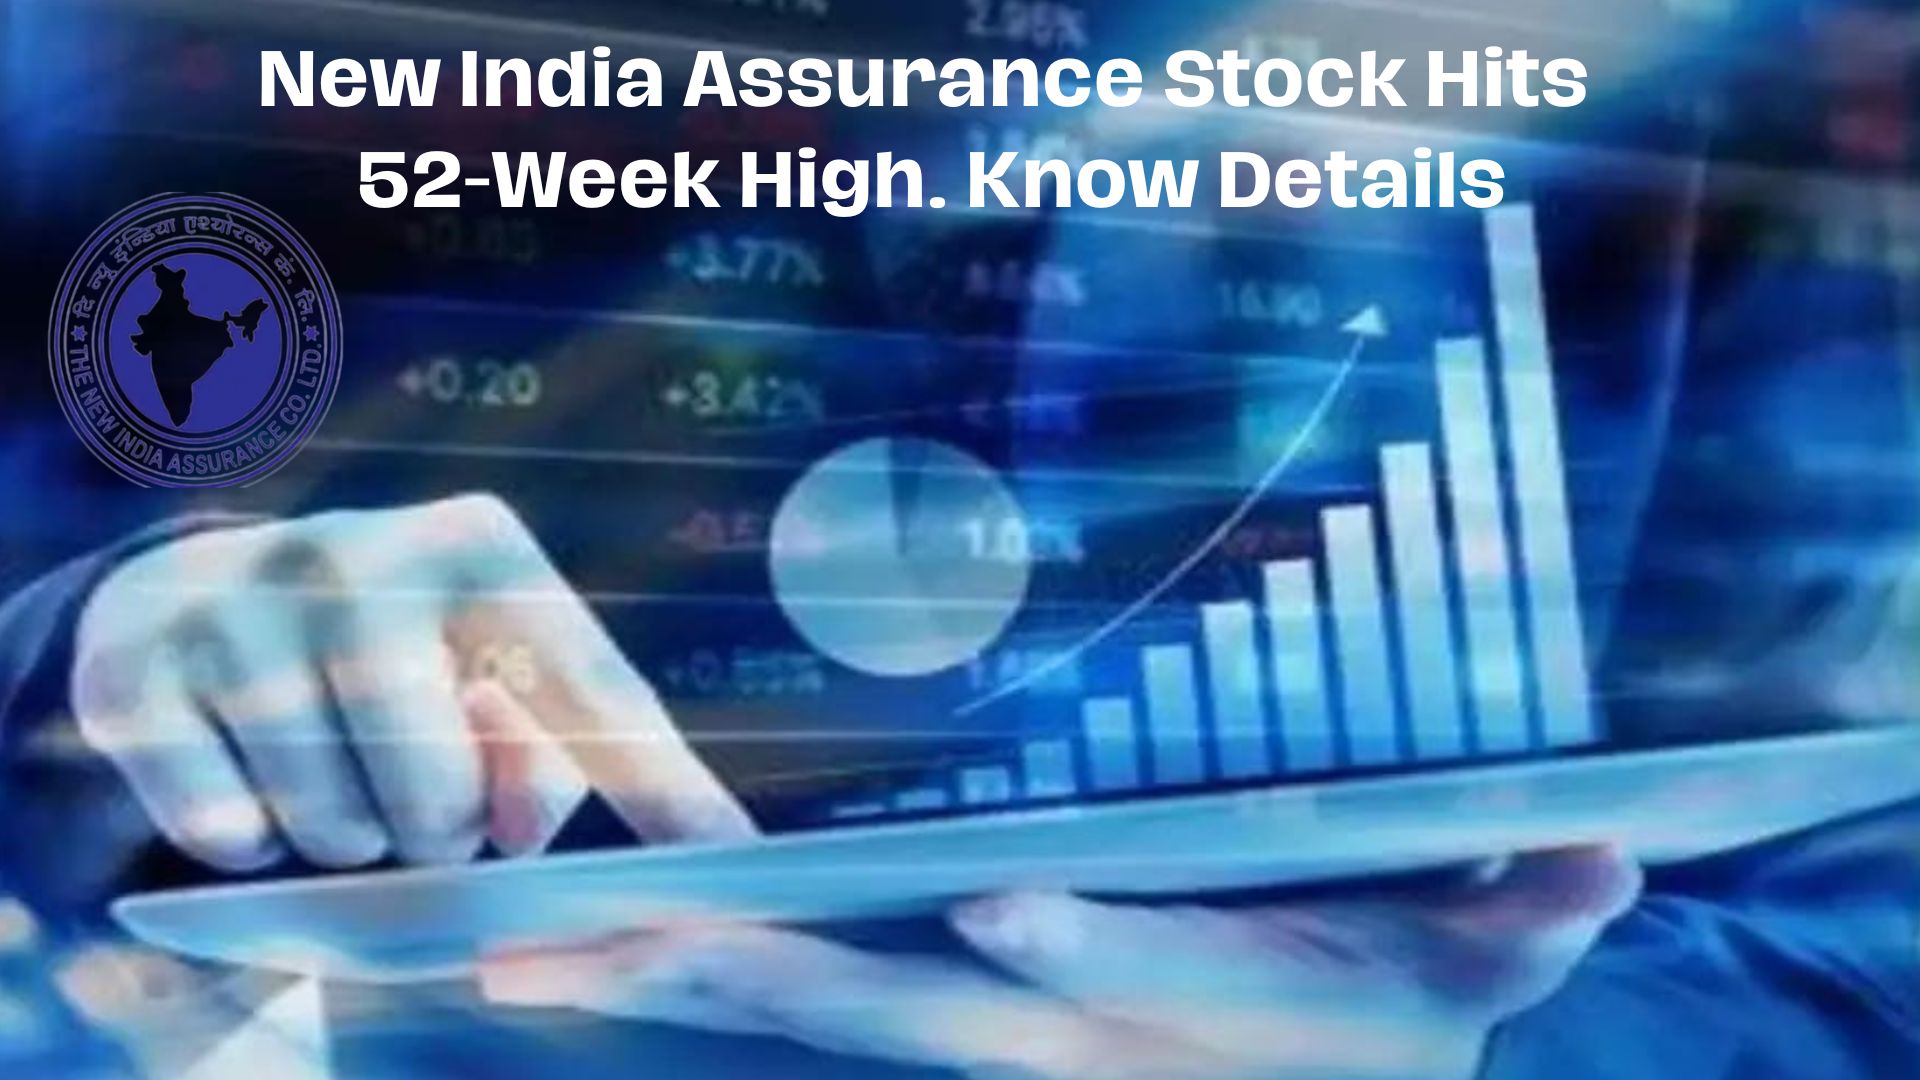 New India Assurance Stock Hits 52-Week High. Know Details